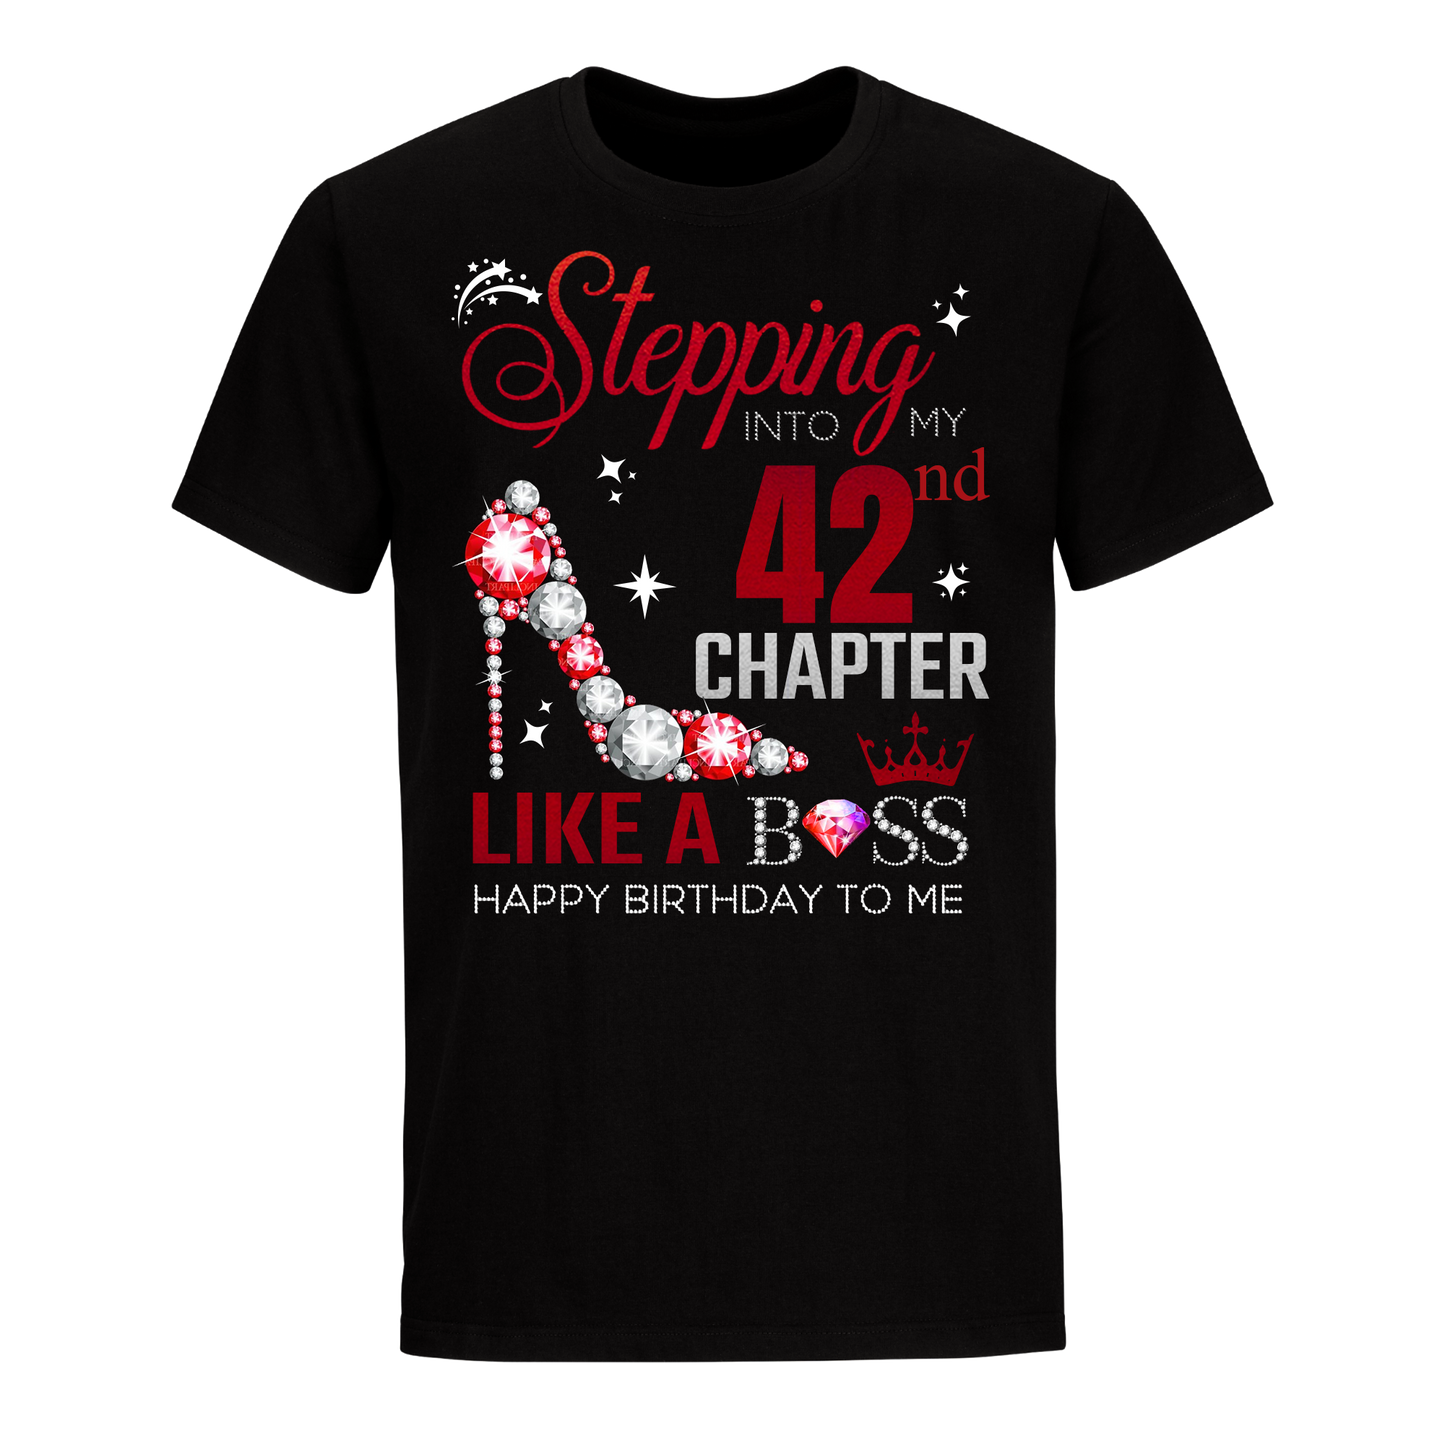 STEPPING INTO MY 42ND CHAPTER UNISEX SHIRT